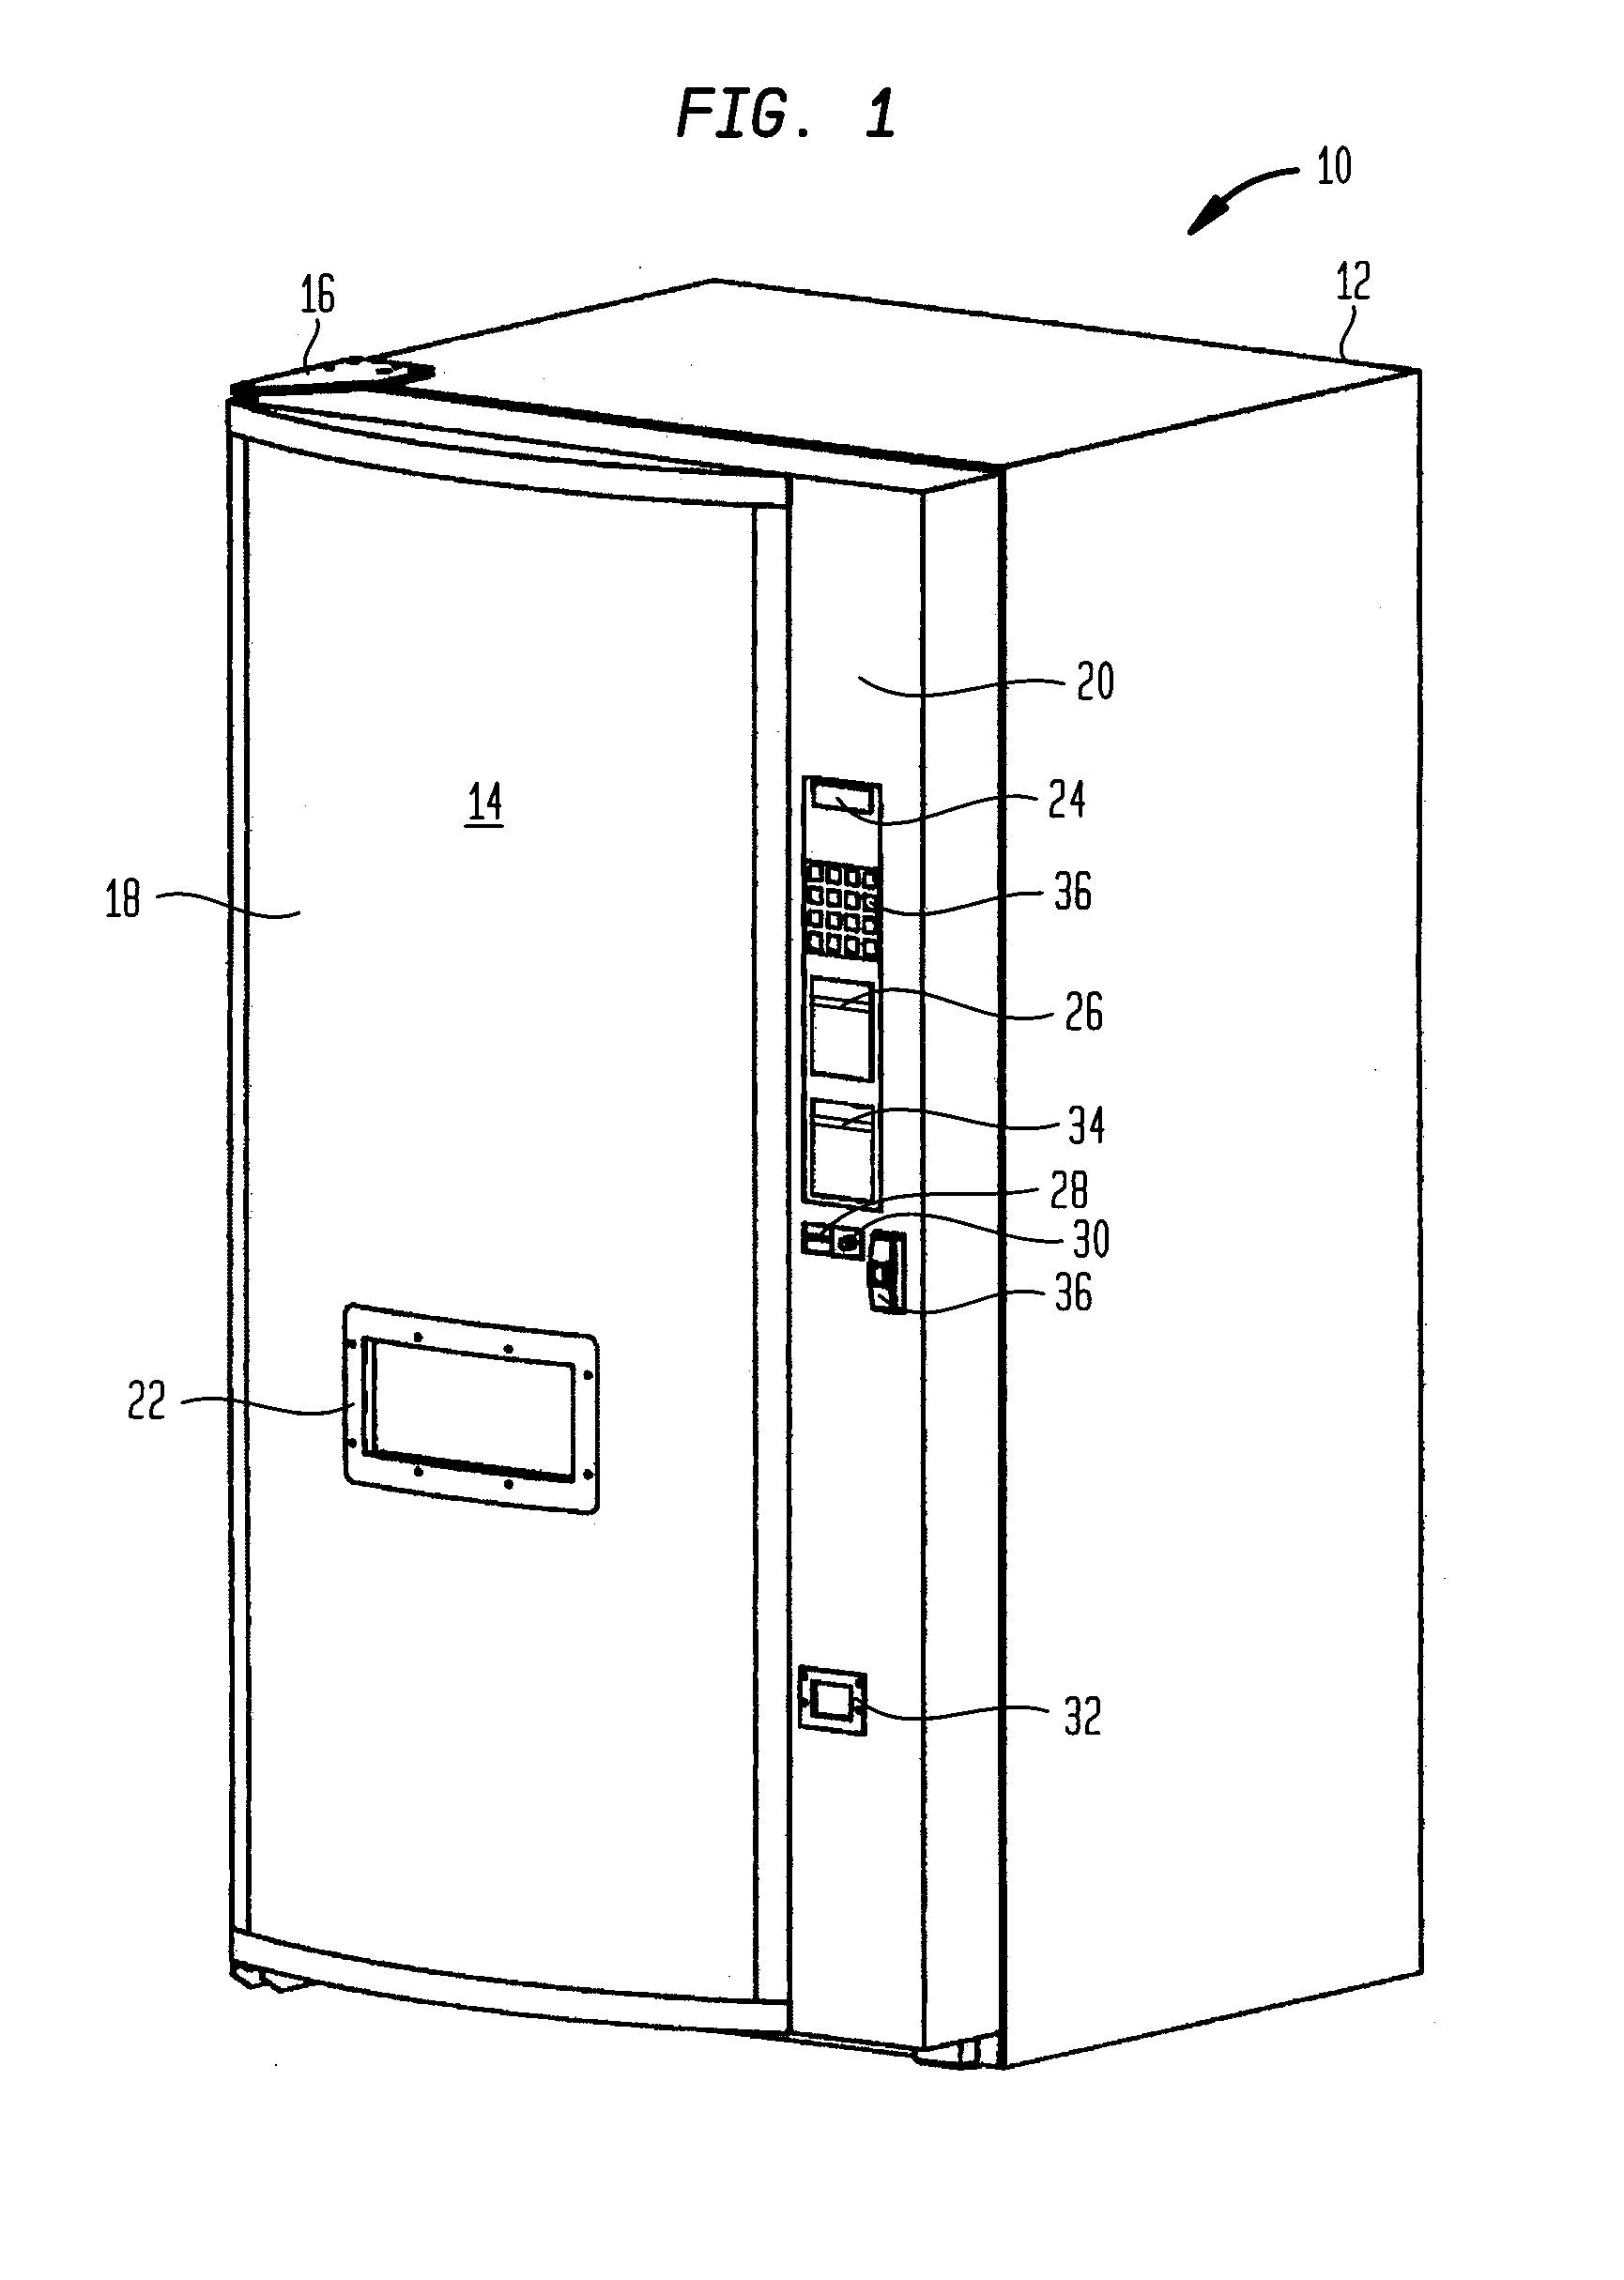 Method and Apparatus for Article Contact Detection